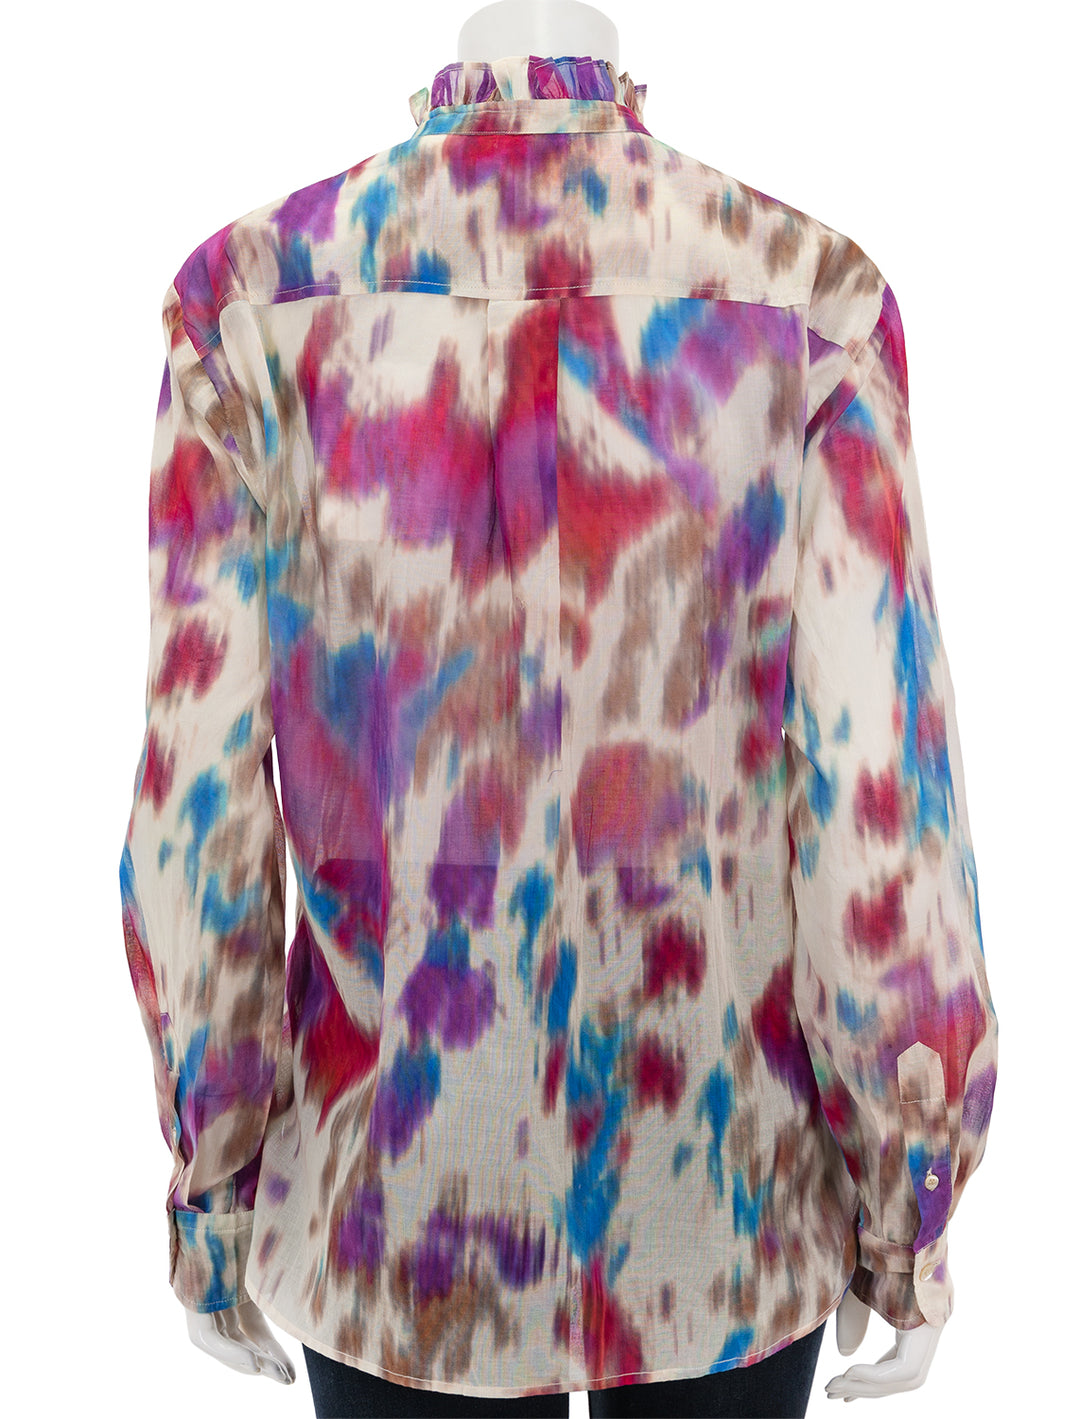 Back view of Isabel Marant Etoile's gamble top in beige and raspberry print.